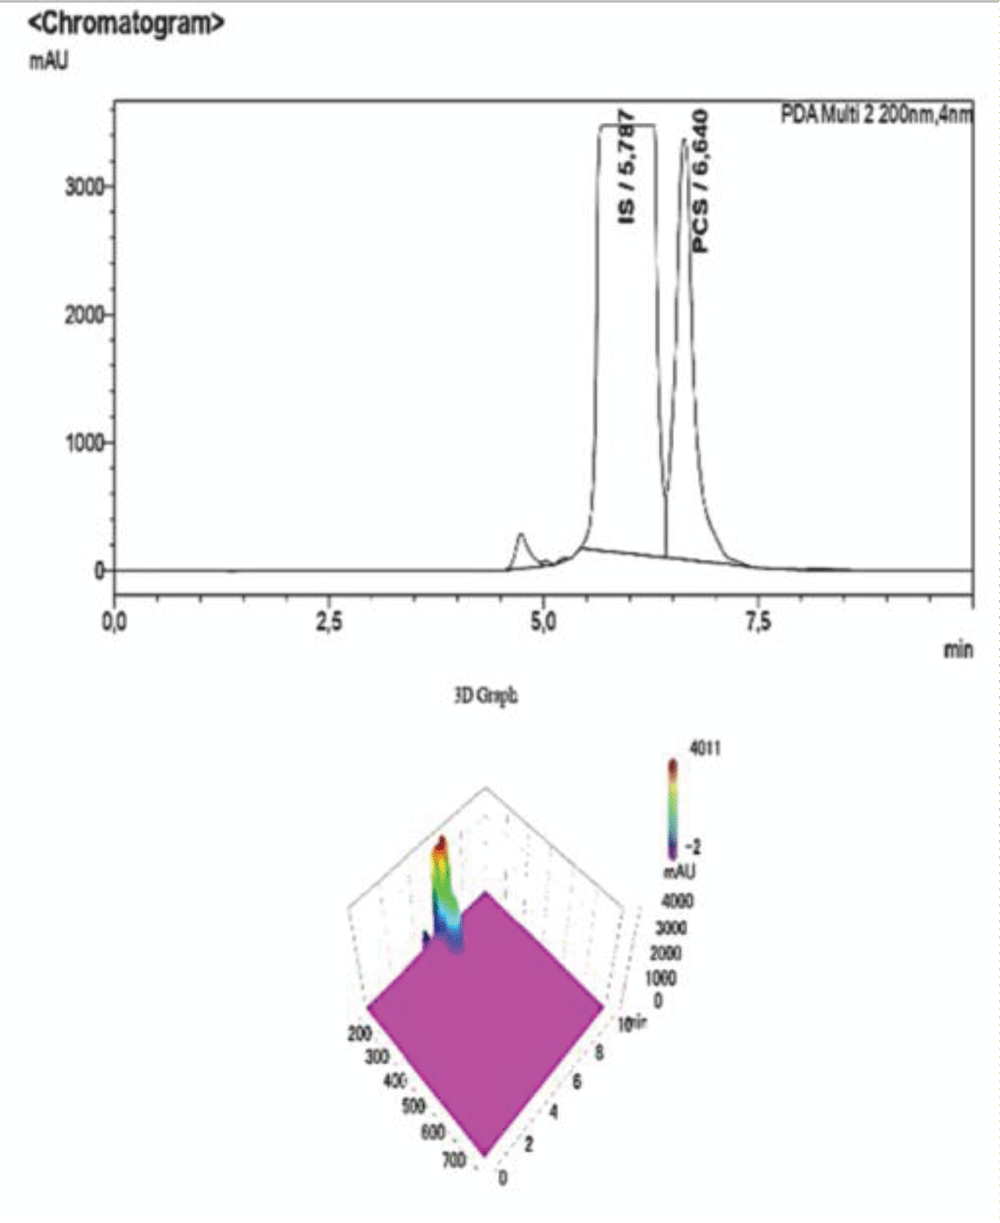 HPLC-UV Chromatogram and 3D Graph of the peaks referring to IS and PCS at a concentration ratio of 2:1 respectively.